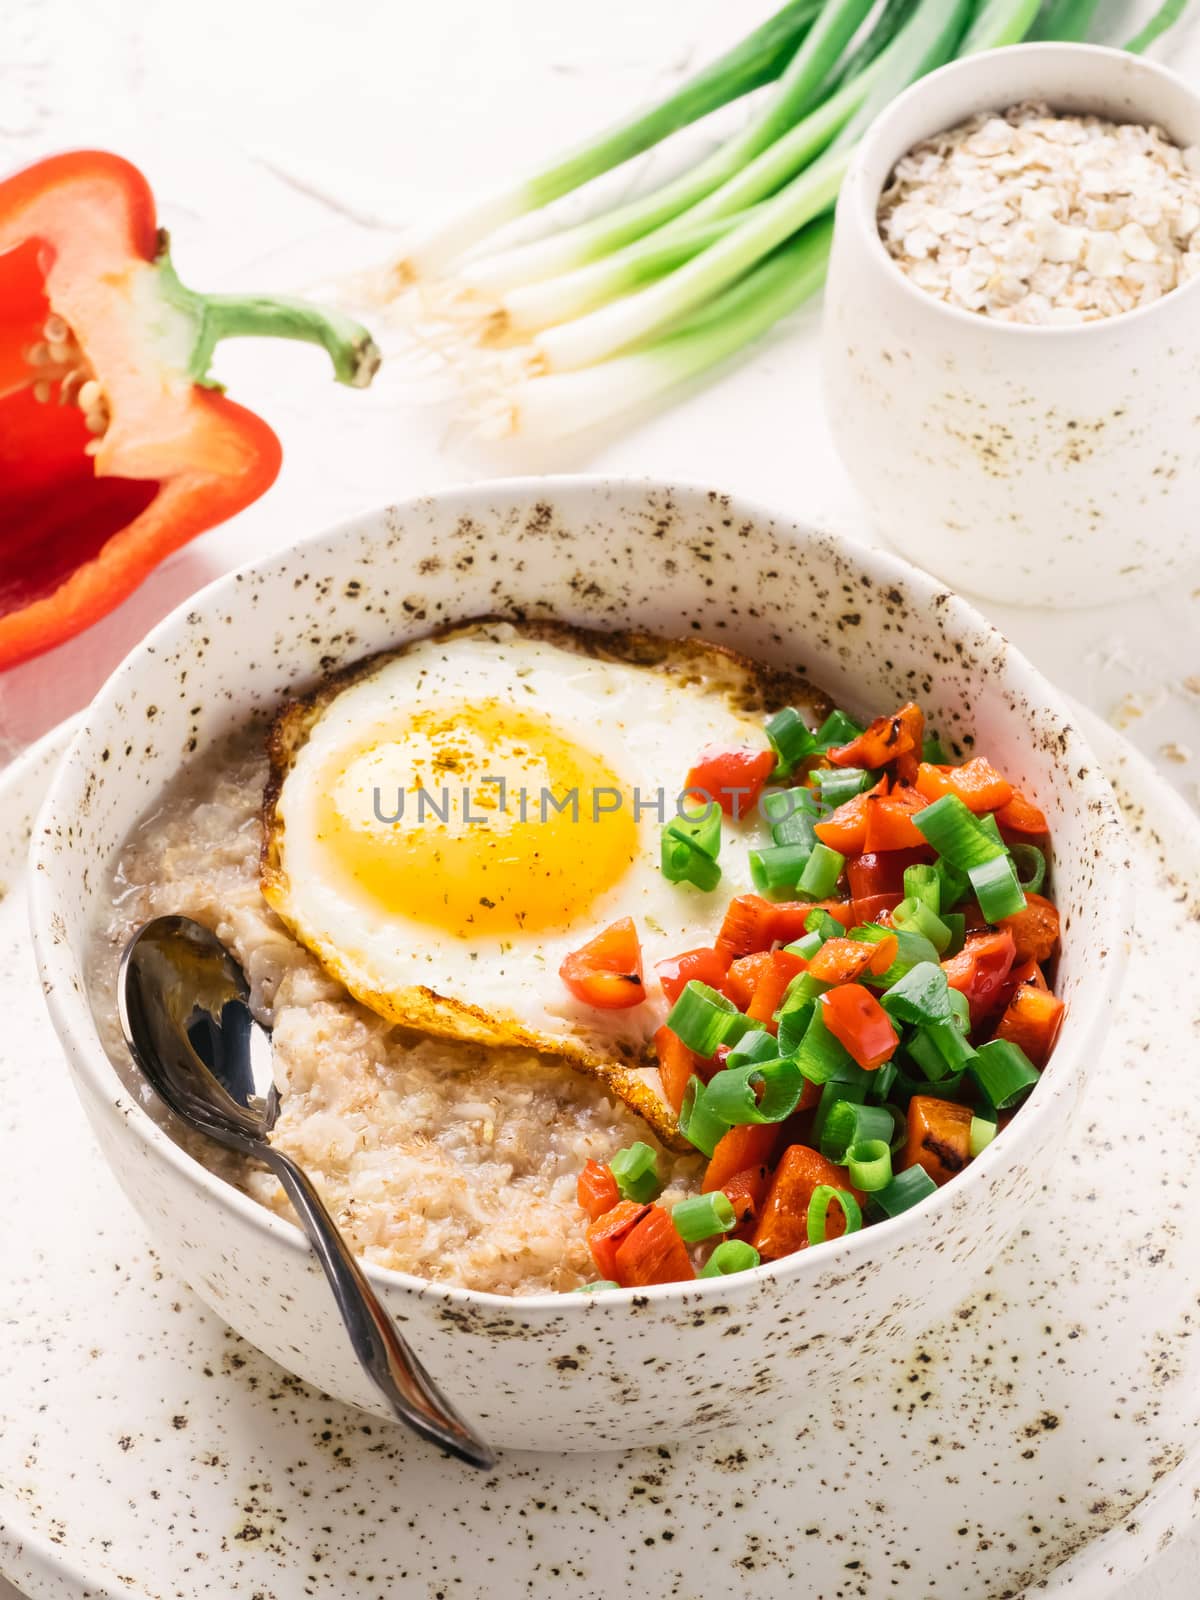 Savory oatmeal, served with vegetables and fried egg by fascinadora